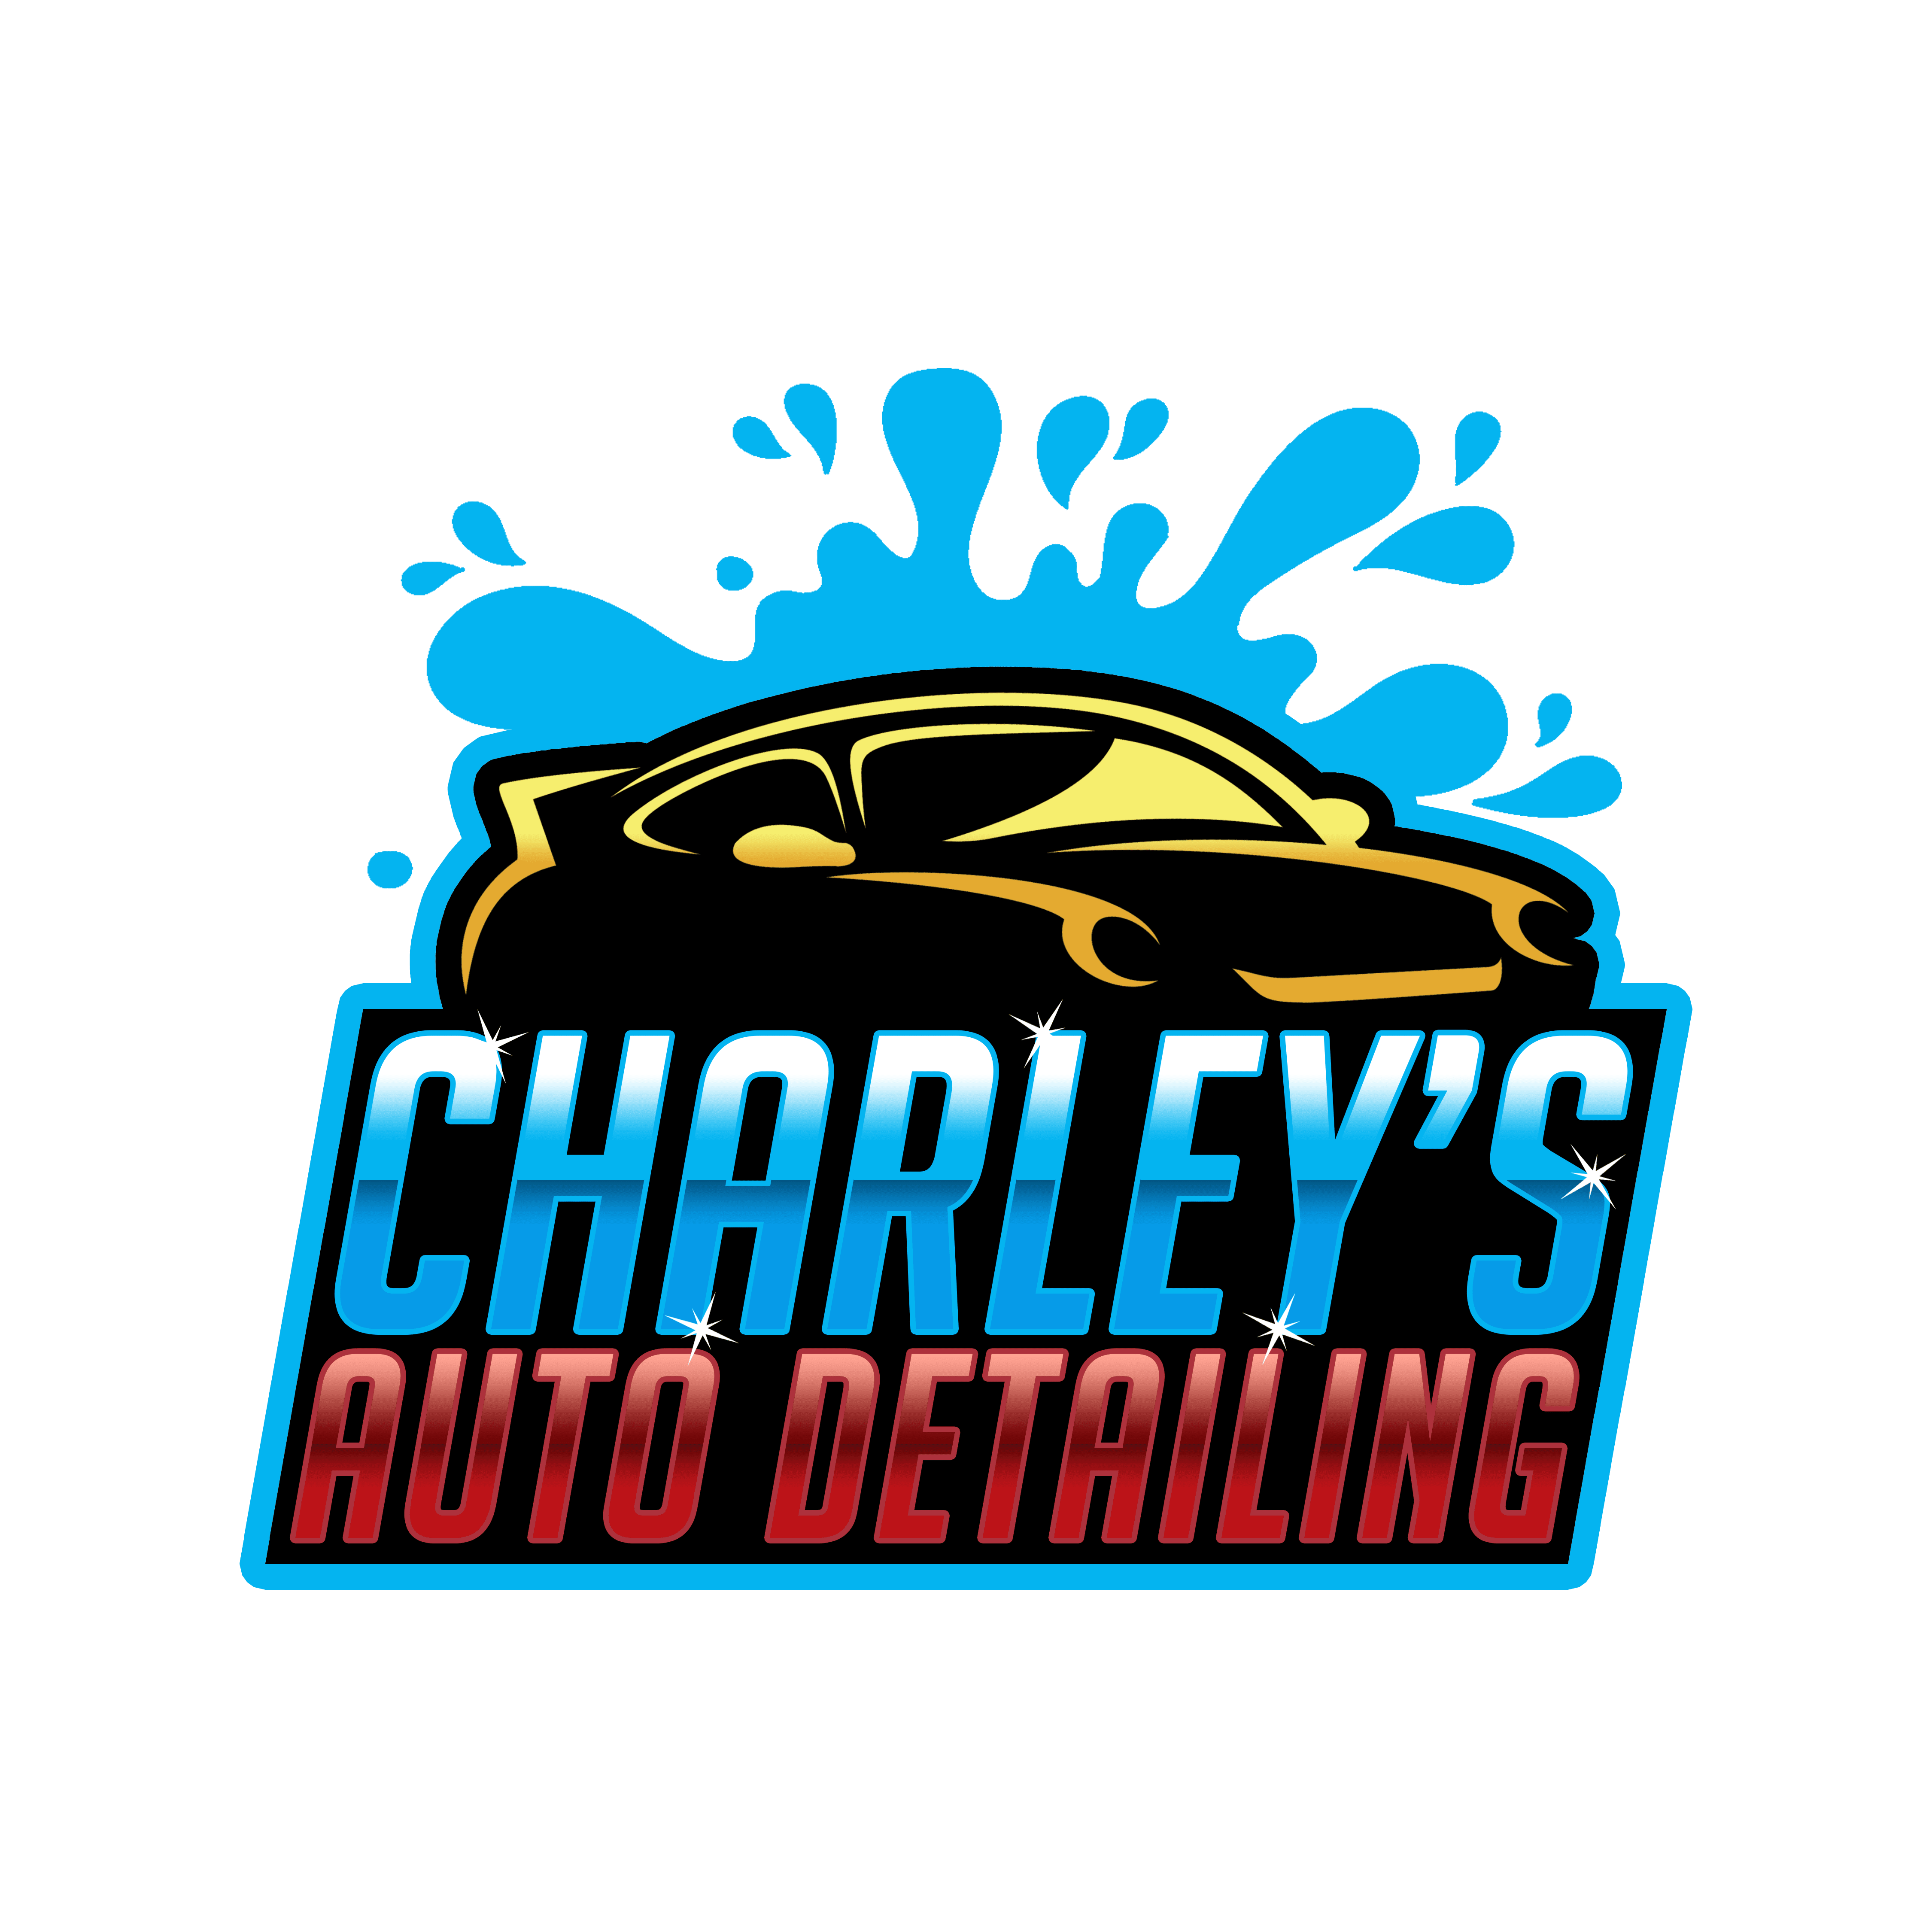 Charley's Auto Detailing